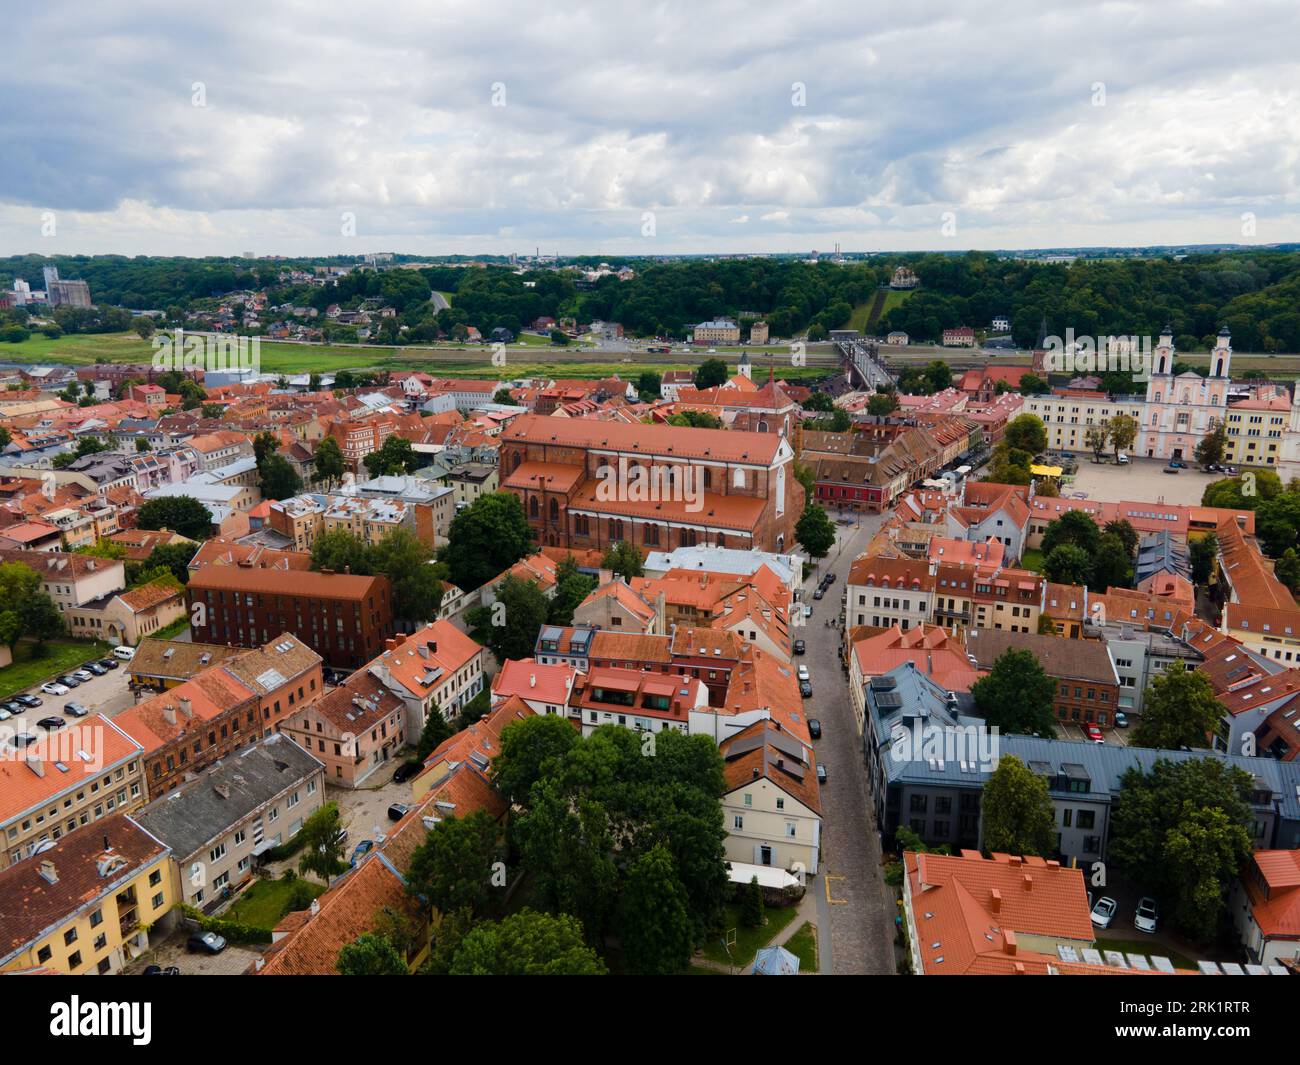 An aerial view of the scenic town of Kaunas, Lithuania Stock Photo